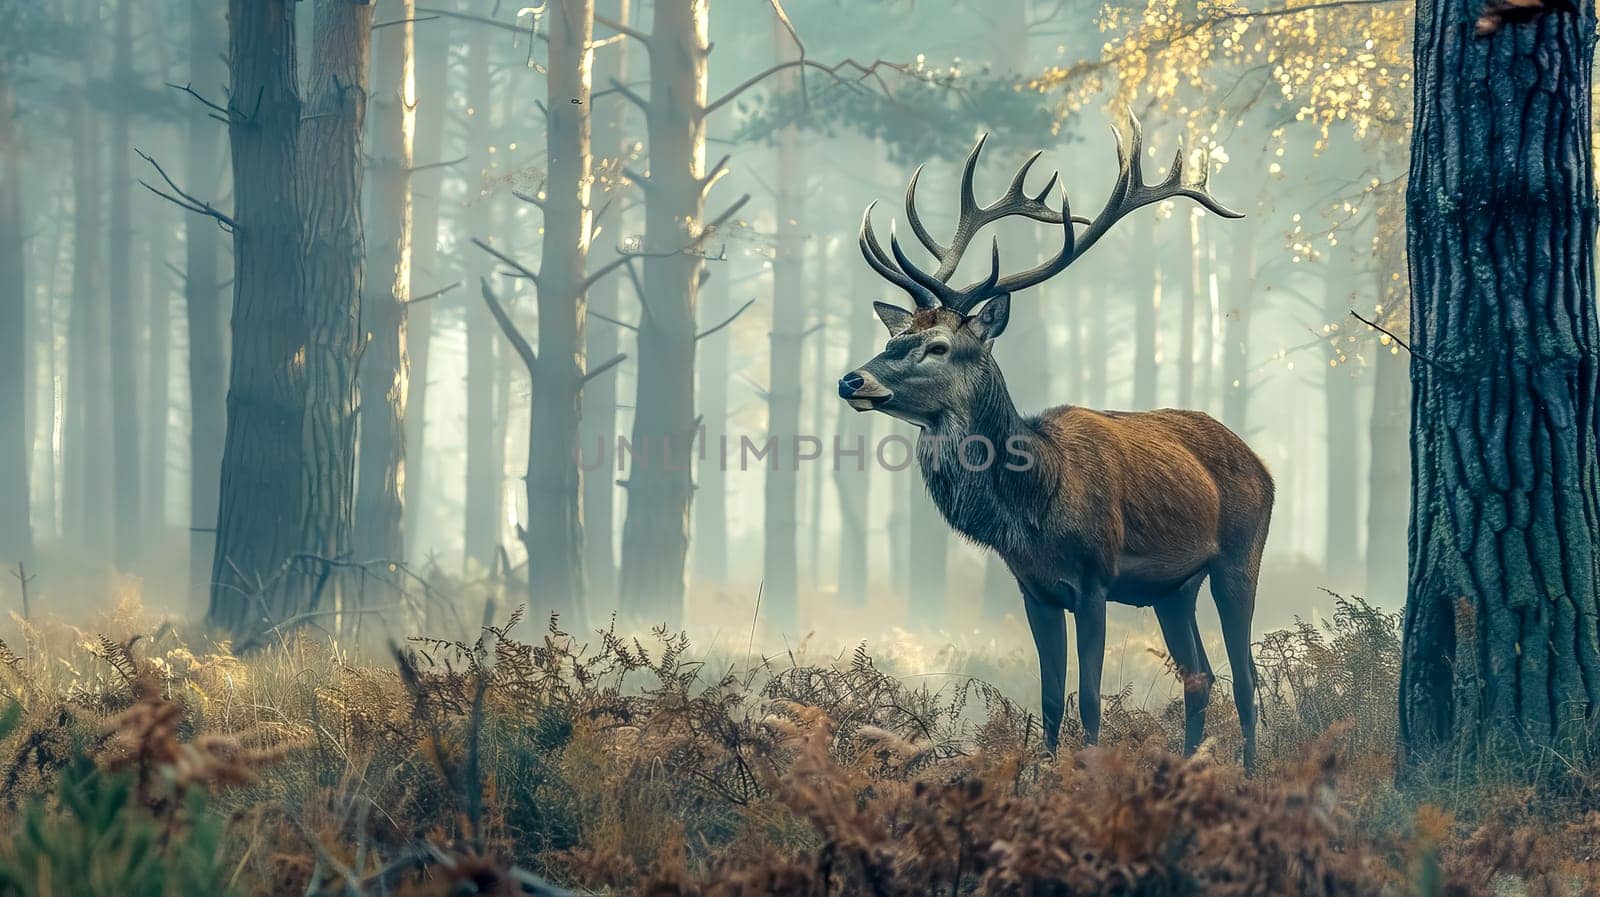 Majestic stag in misty forest dawn by Edophoto